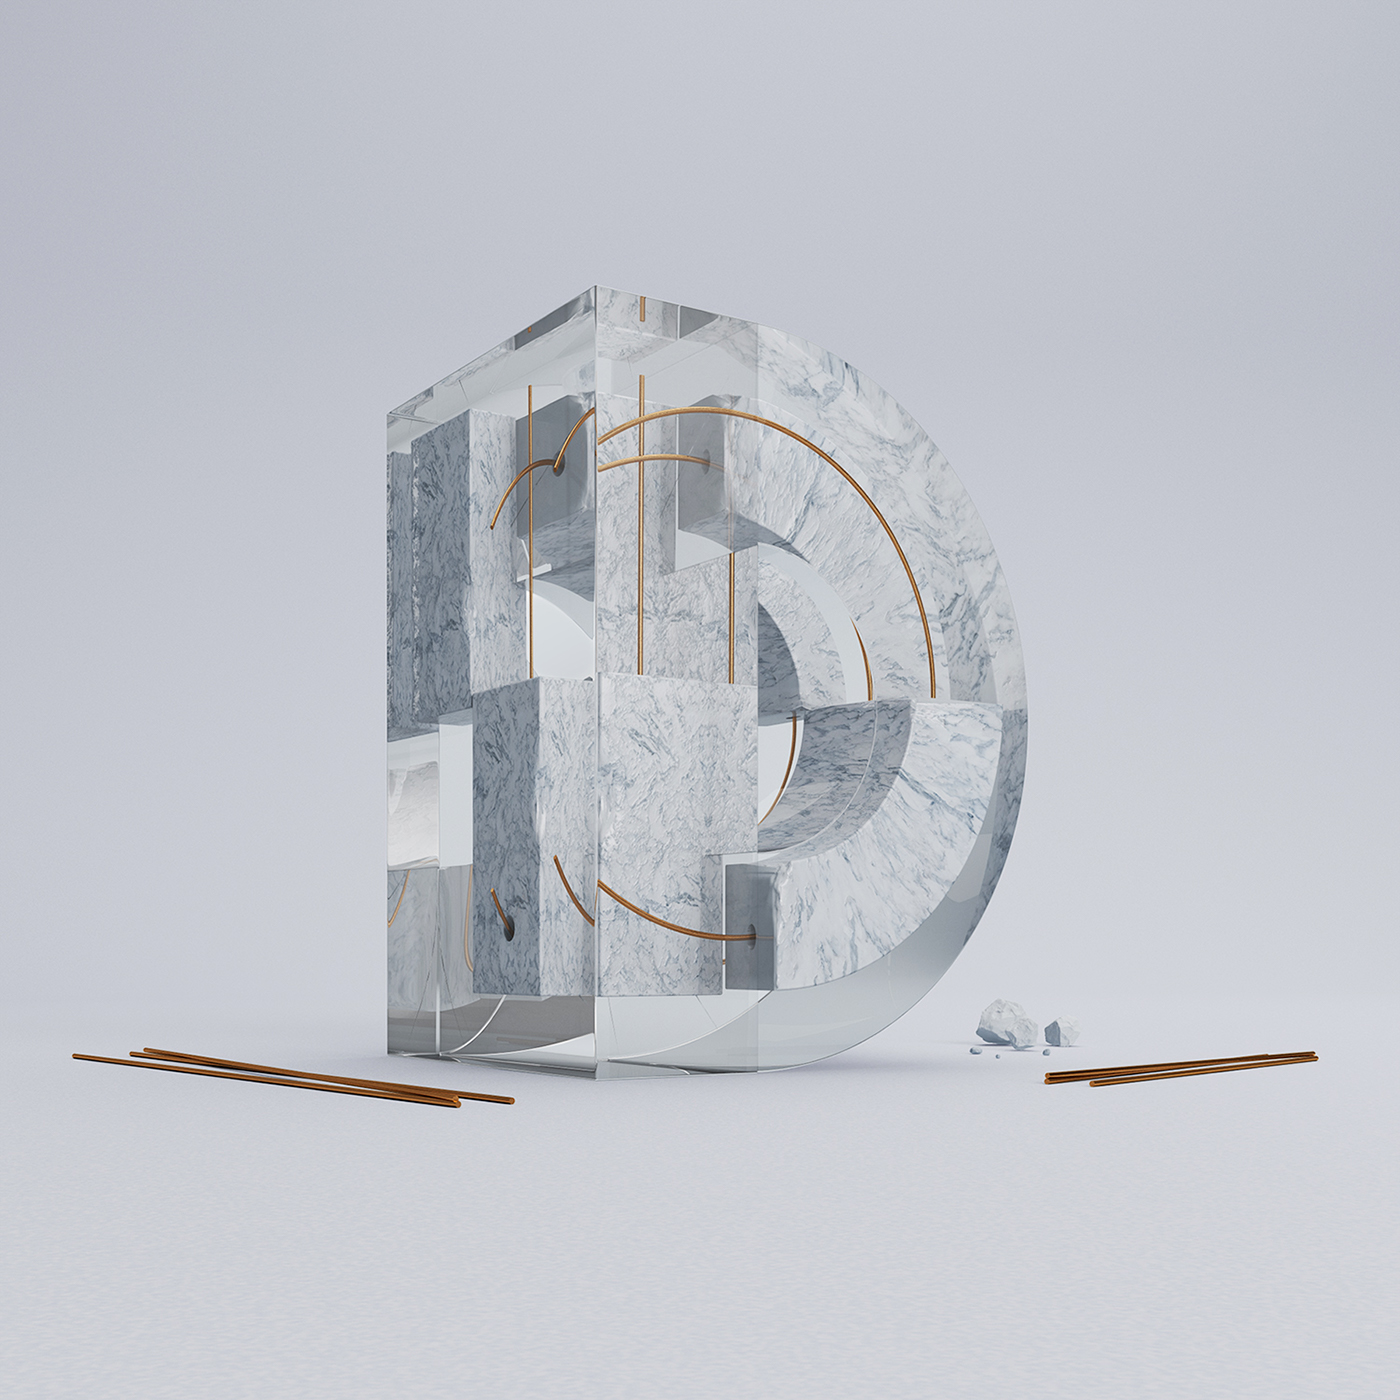 36days 36daysoftype CGI 3D type font plants water fire metal ad free inspire pantone campaign